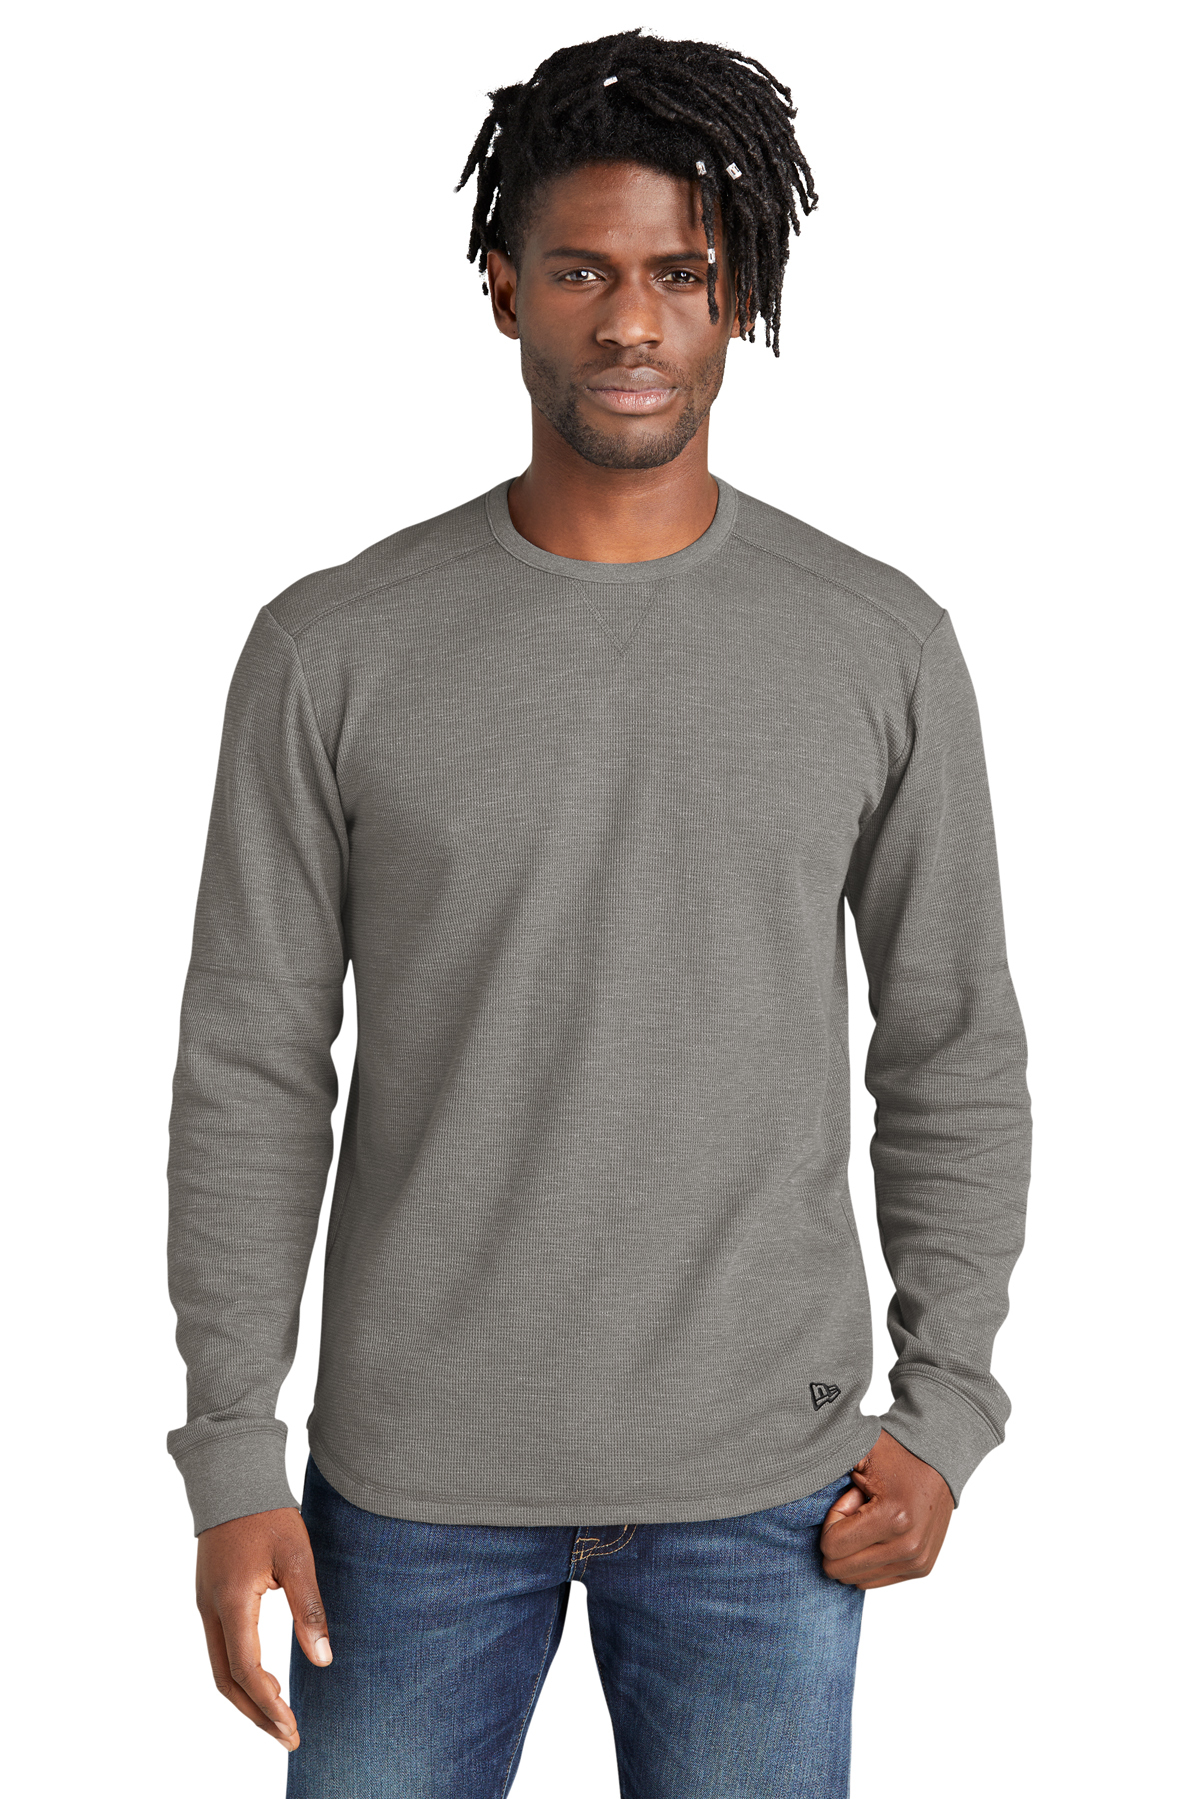 New Era Thermal Long Sleeve | Product | Company Casuals